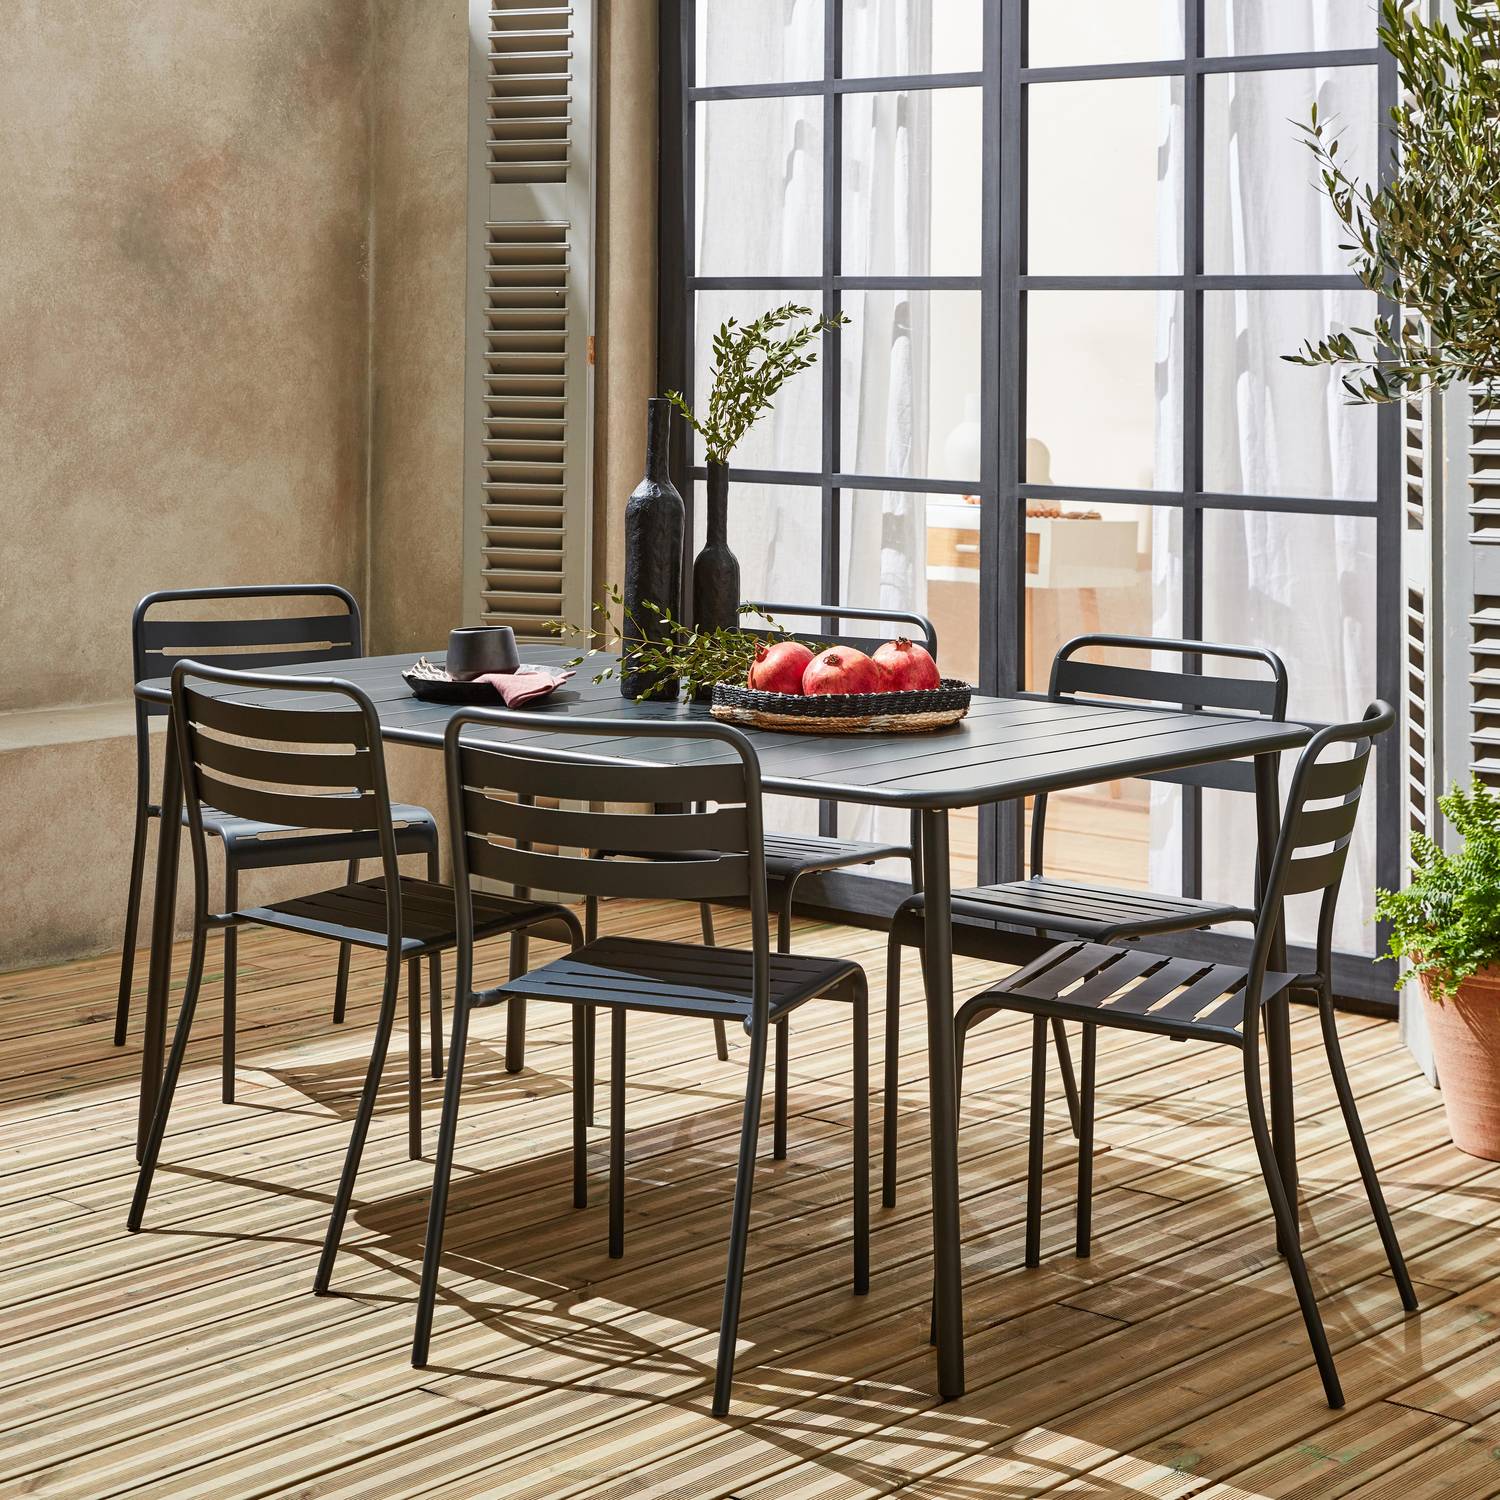 6-8 seater rectangular steel garden table set with chairs, 160cm, anthracite Photo1